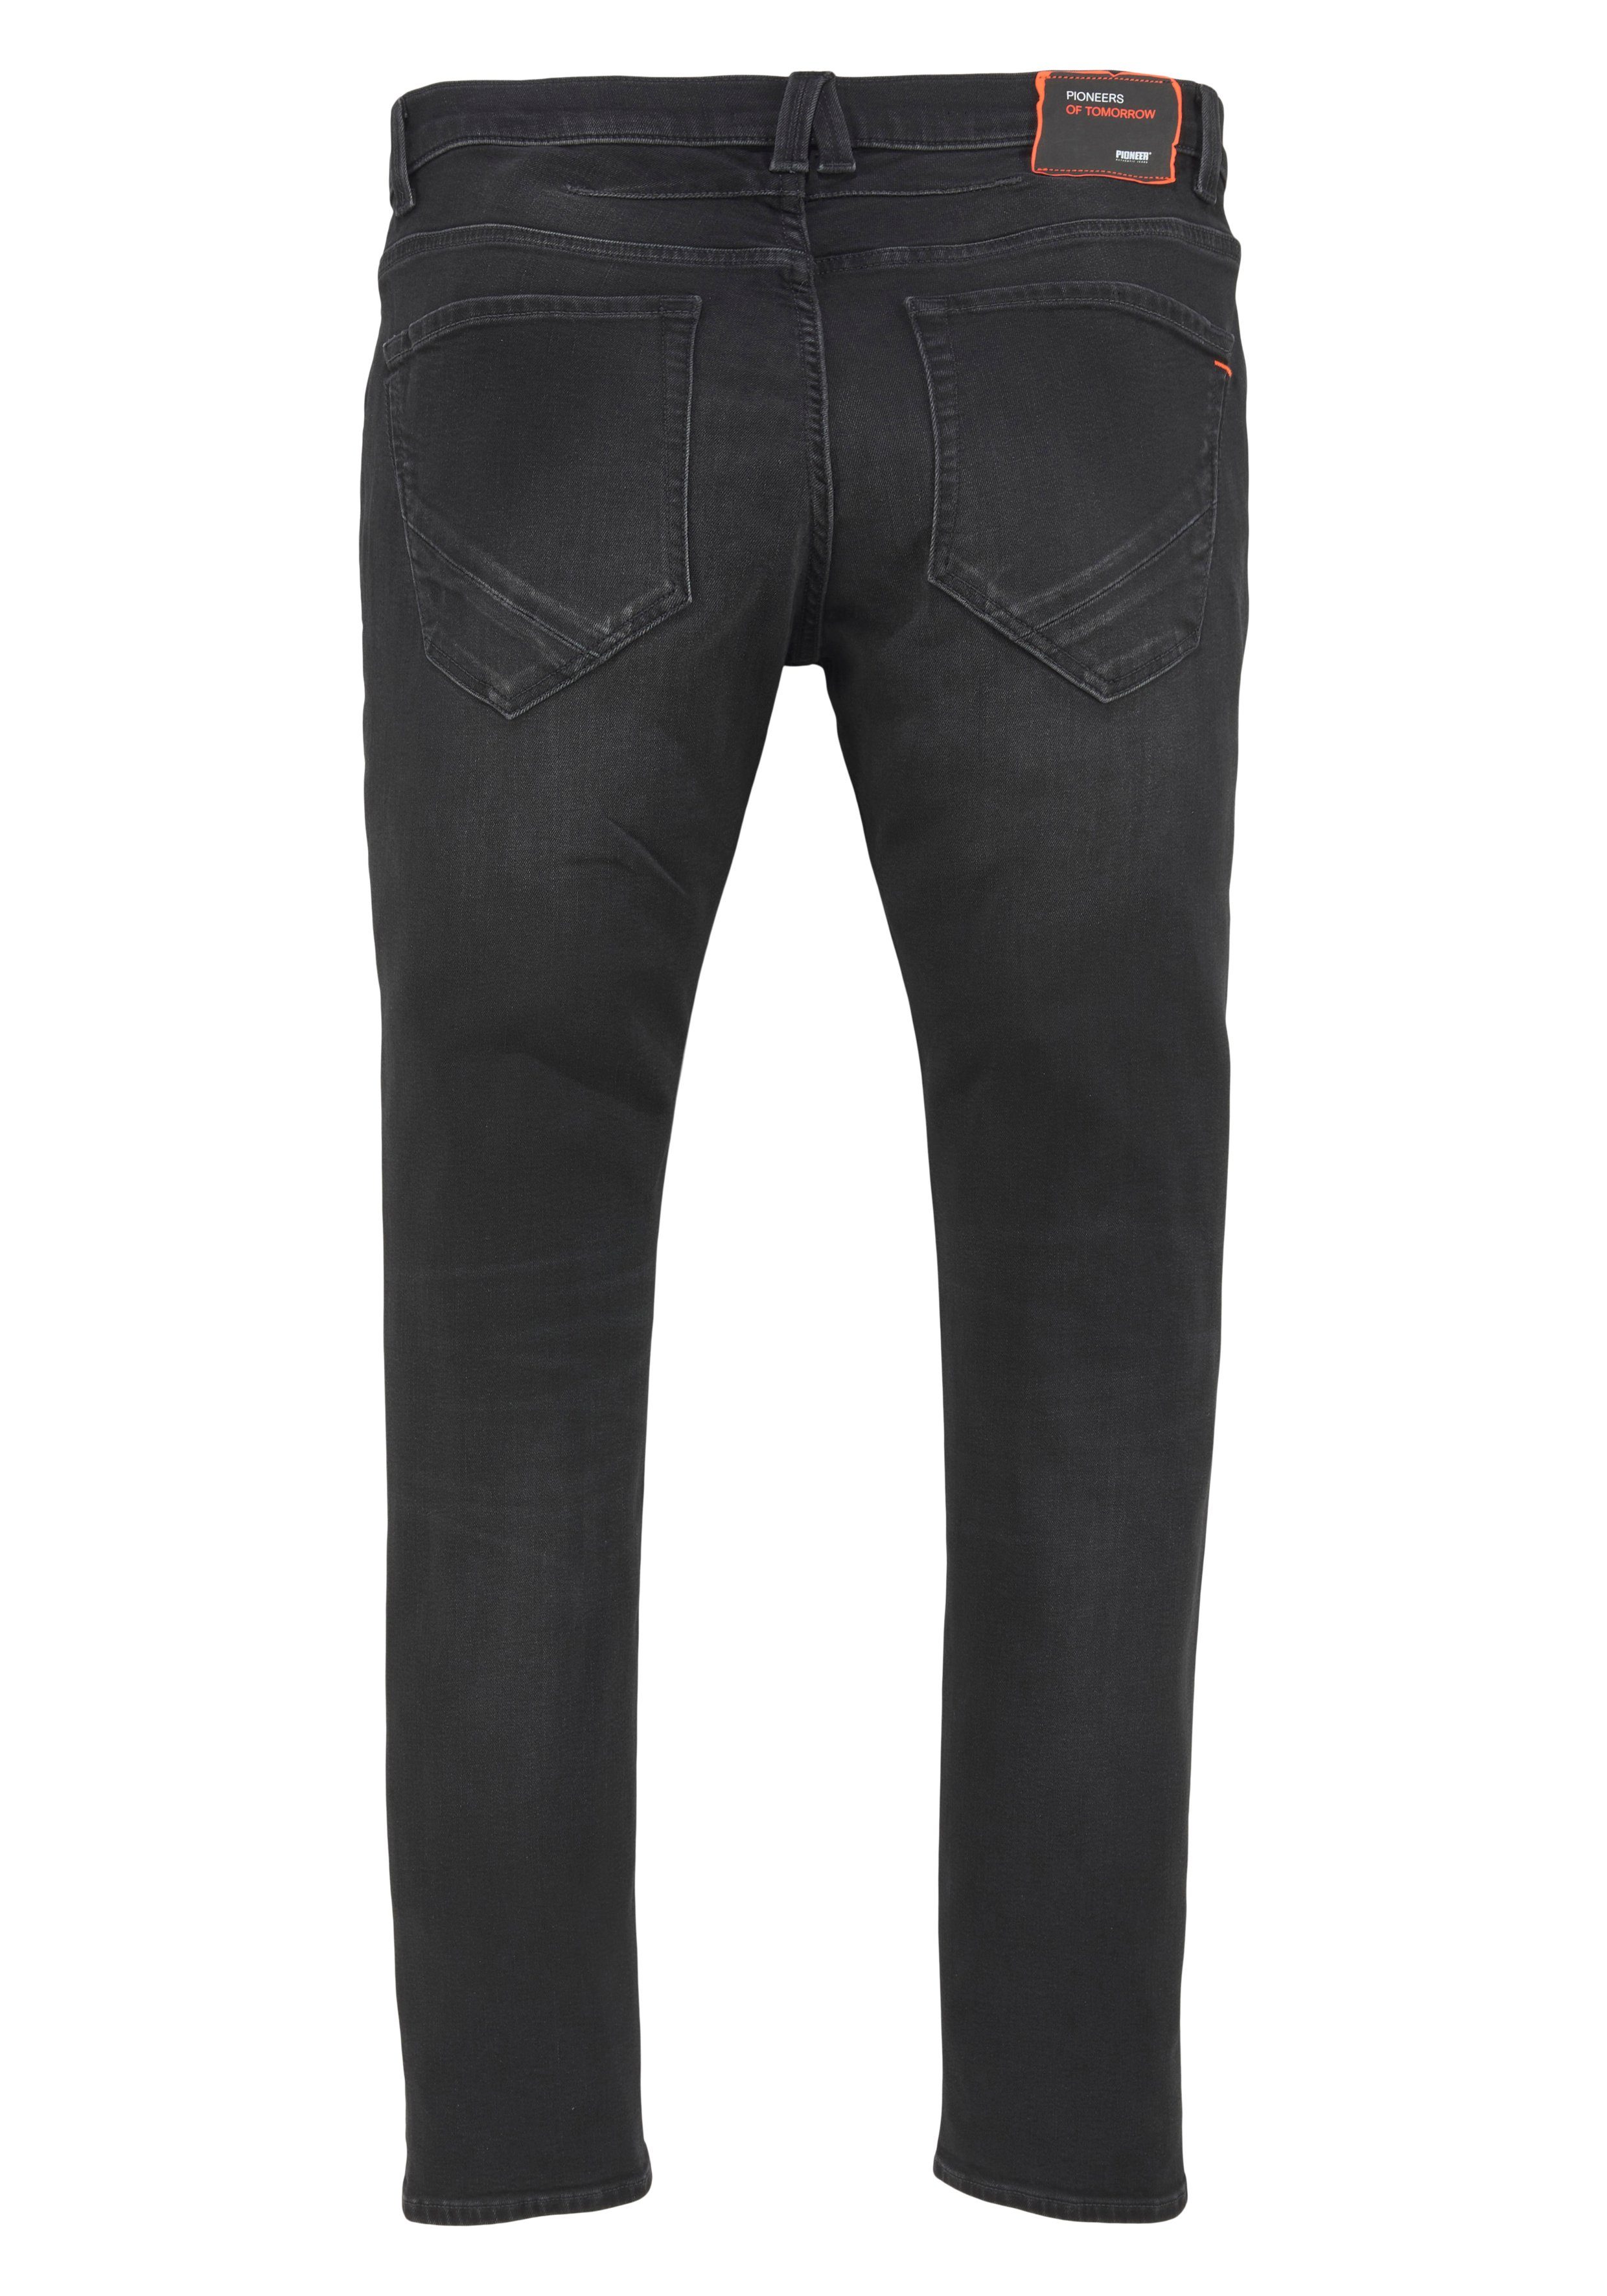 Ethan Jeans Slim-fit-Jeans fashion Authentic grey dark Pioneer